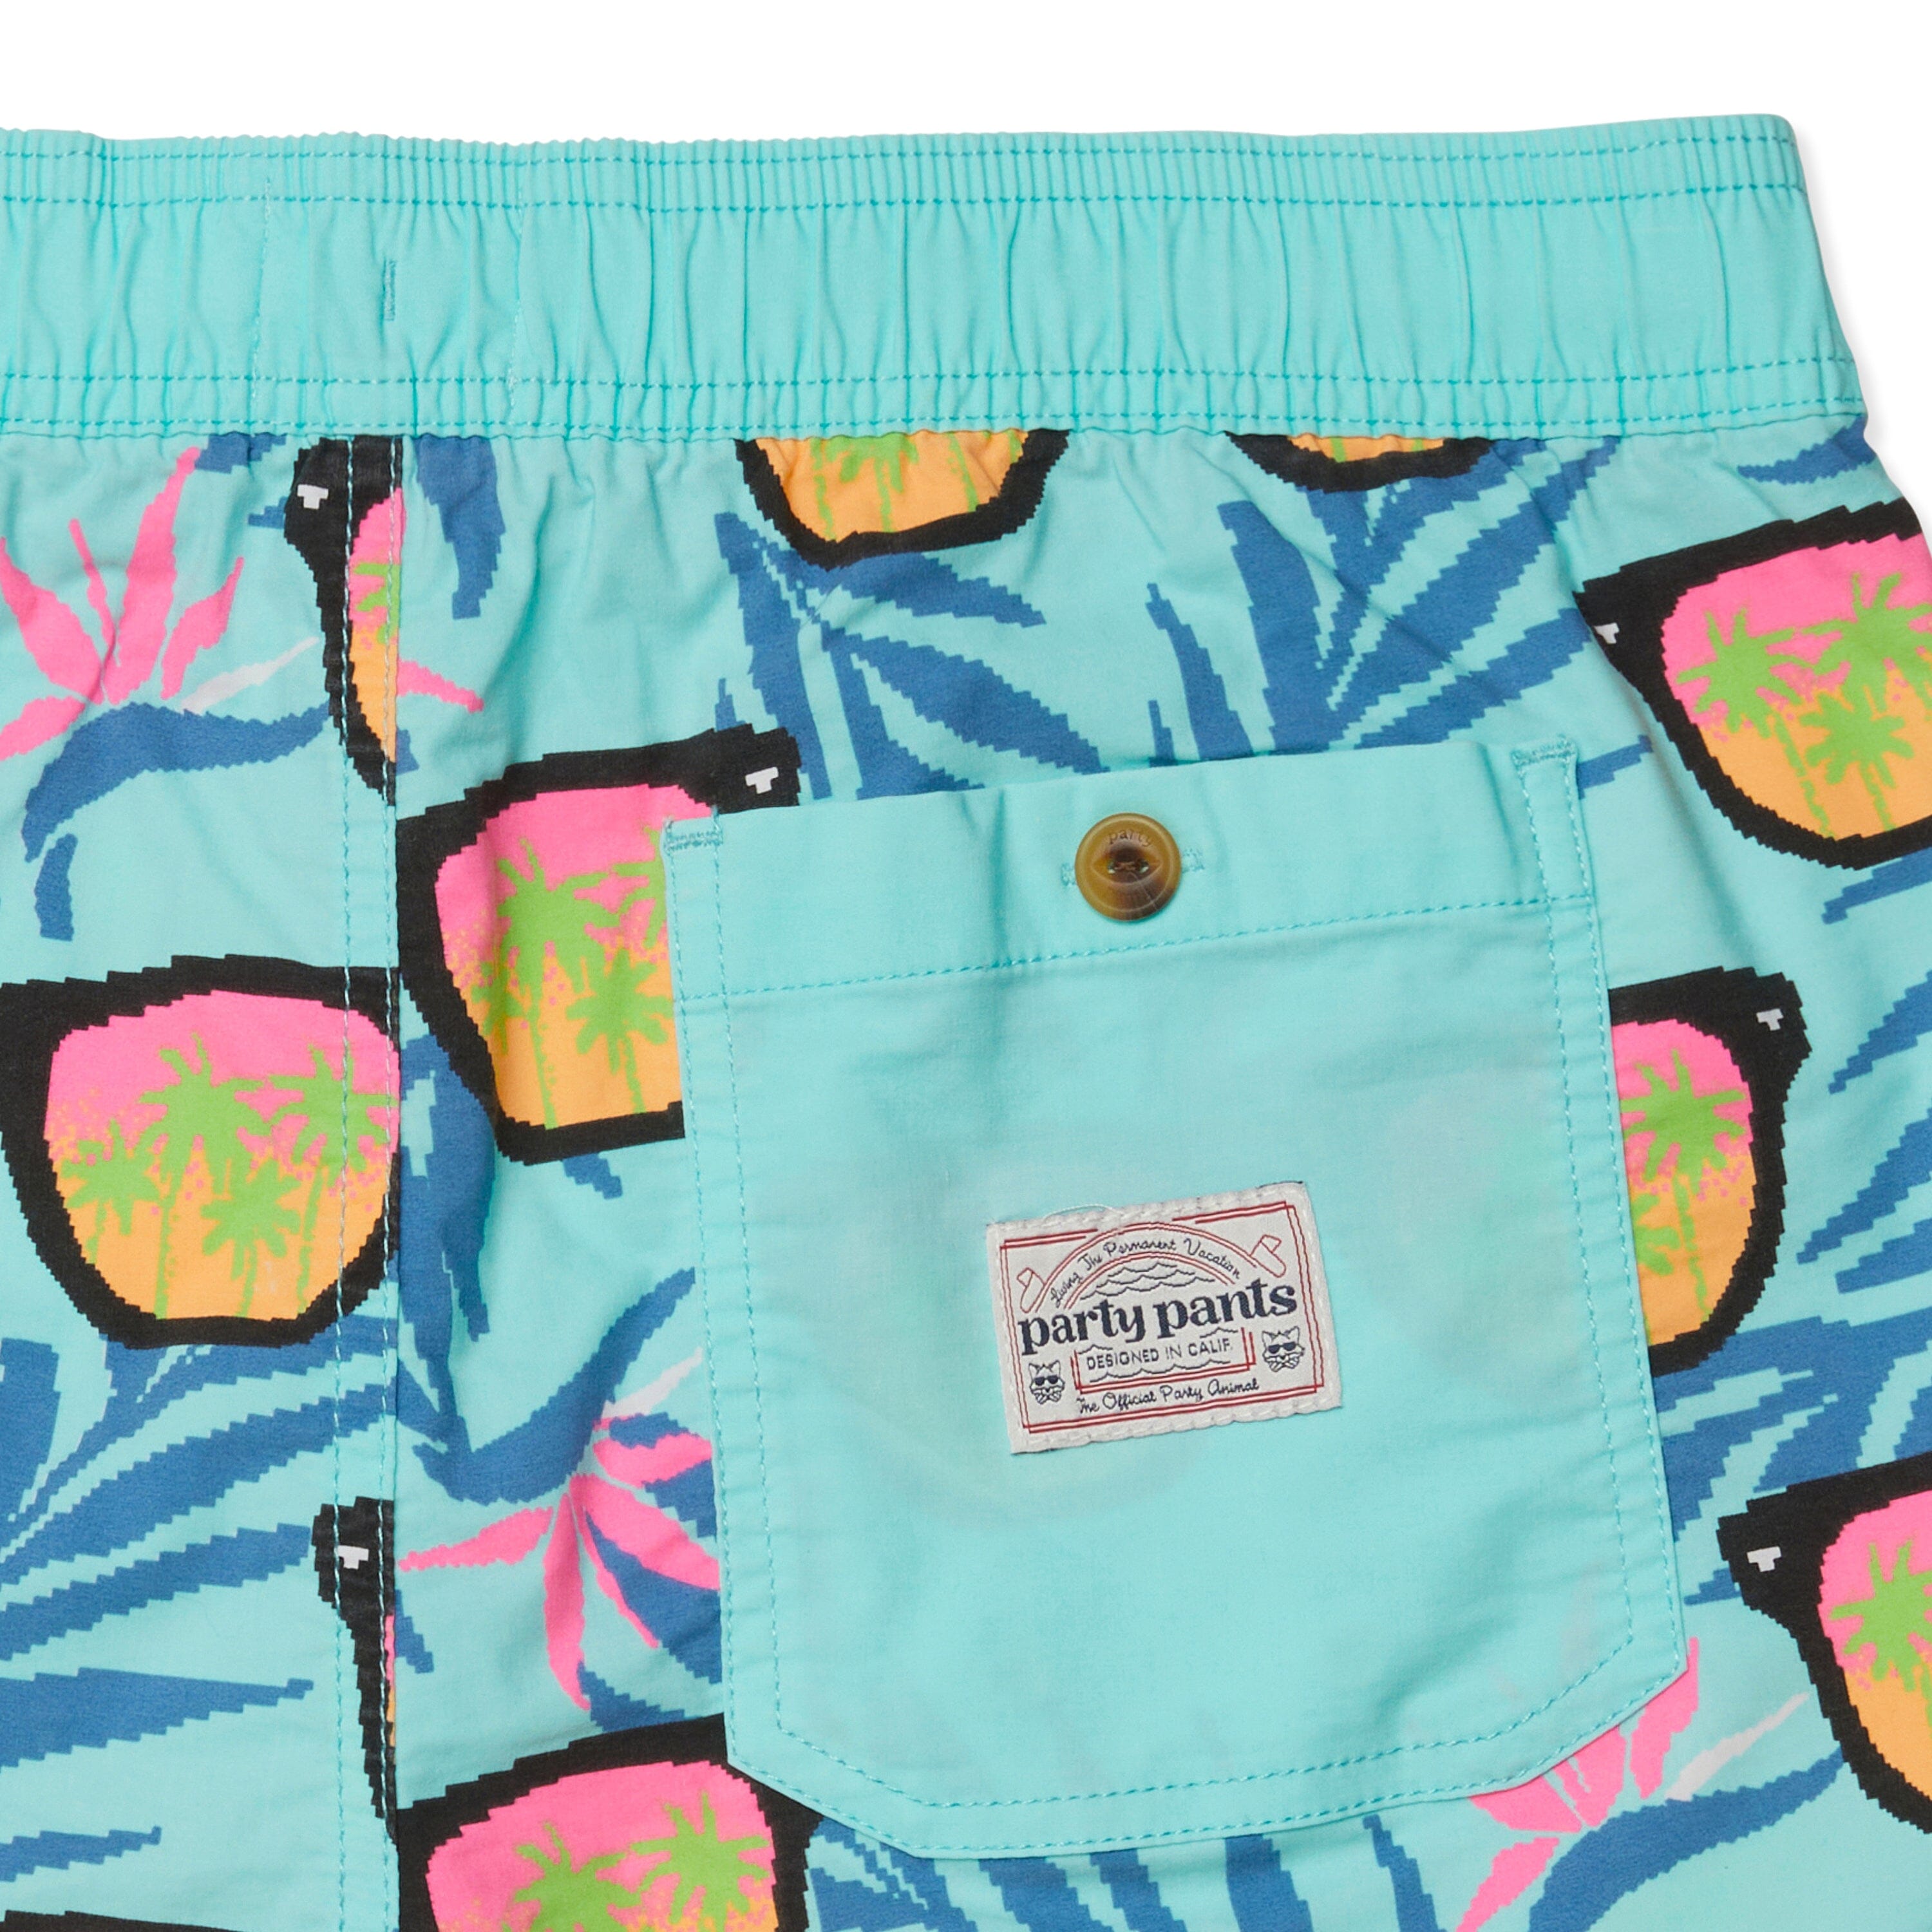 SHADY PARTY STARTER SHORT - MINT GREEN PRINTED SHORTS PARTY PANTS 